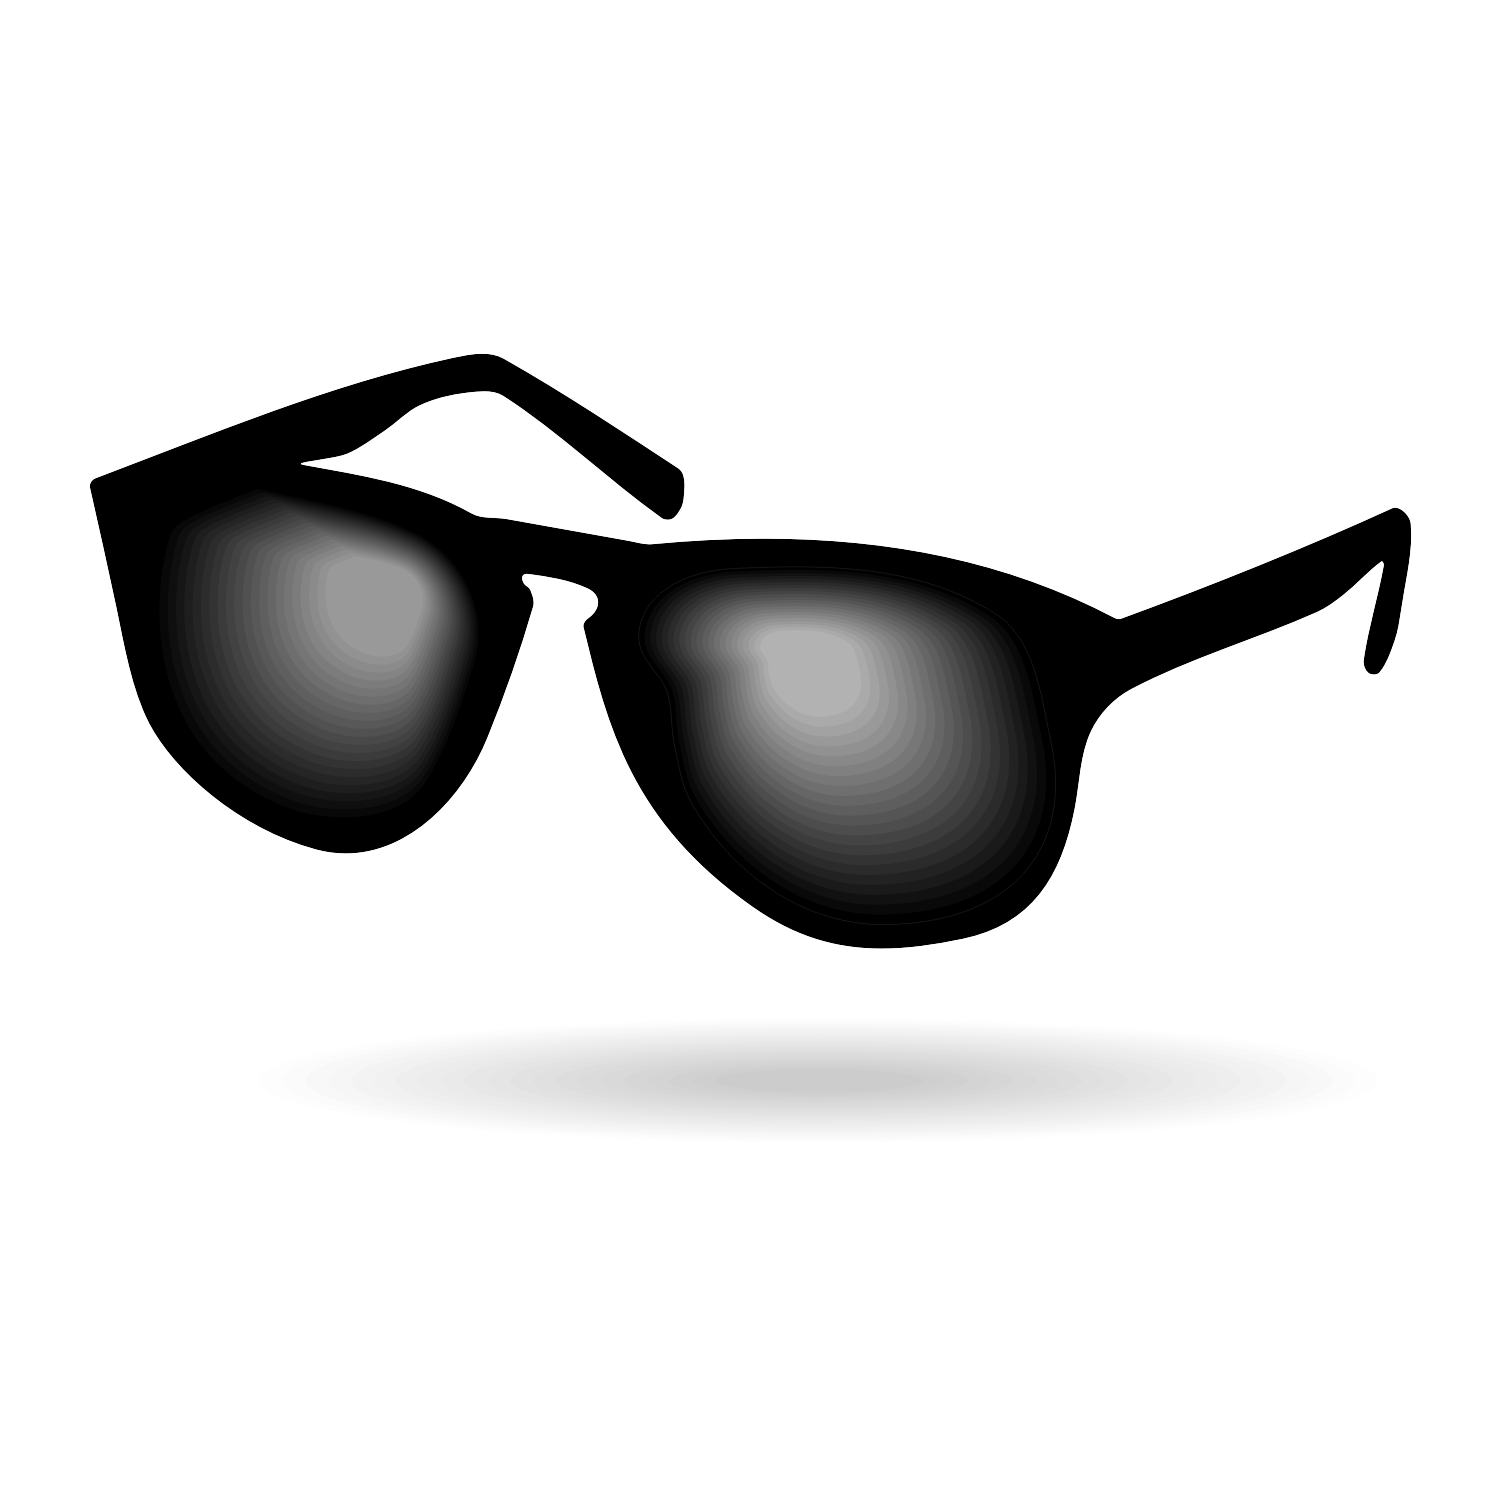 Sunglass Clip Art Free Related Keywords & Suggestions - Sung